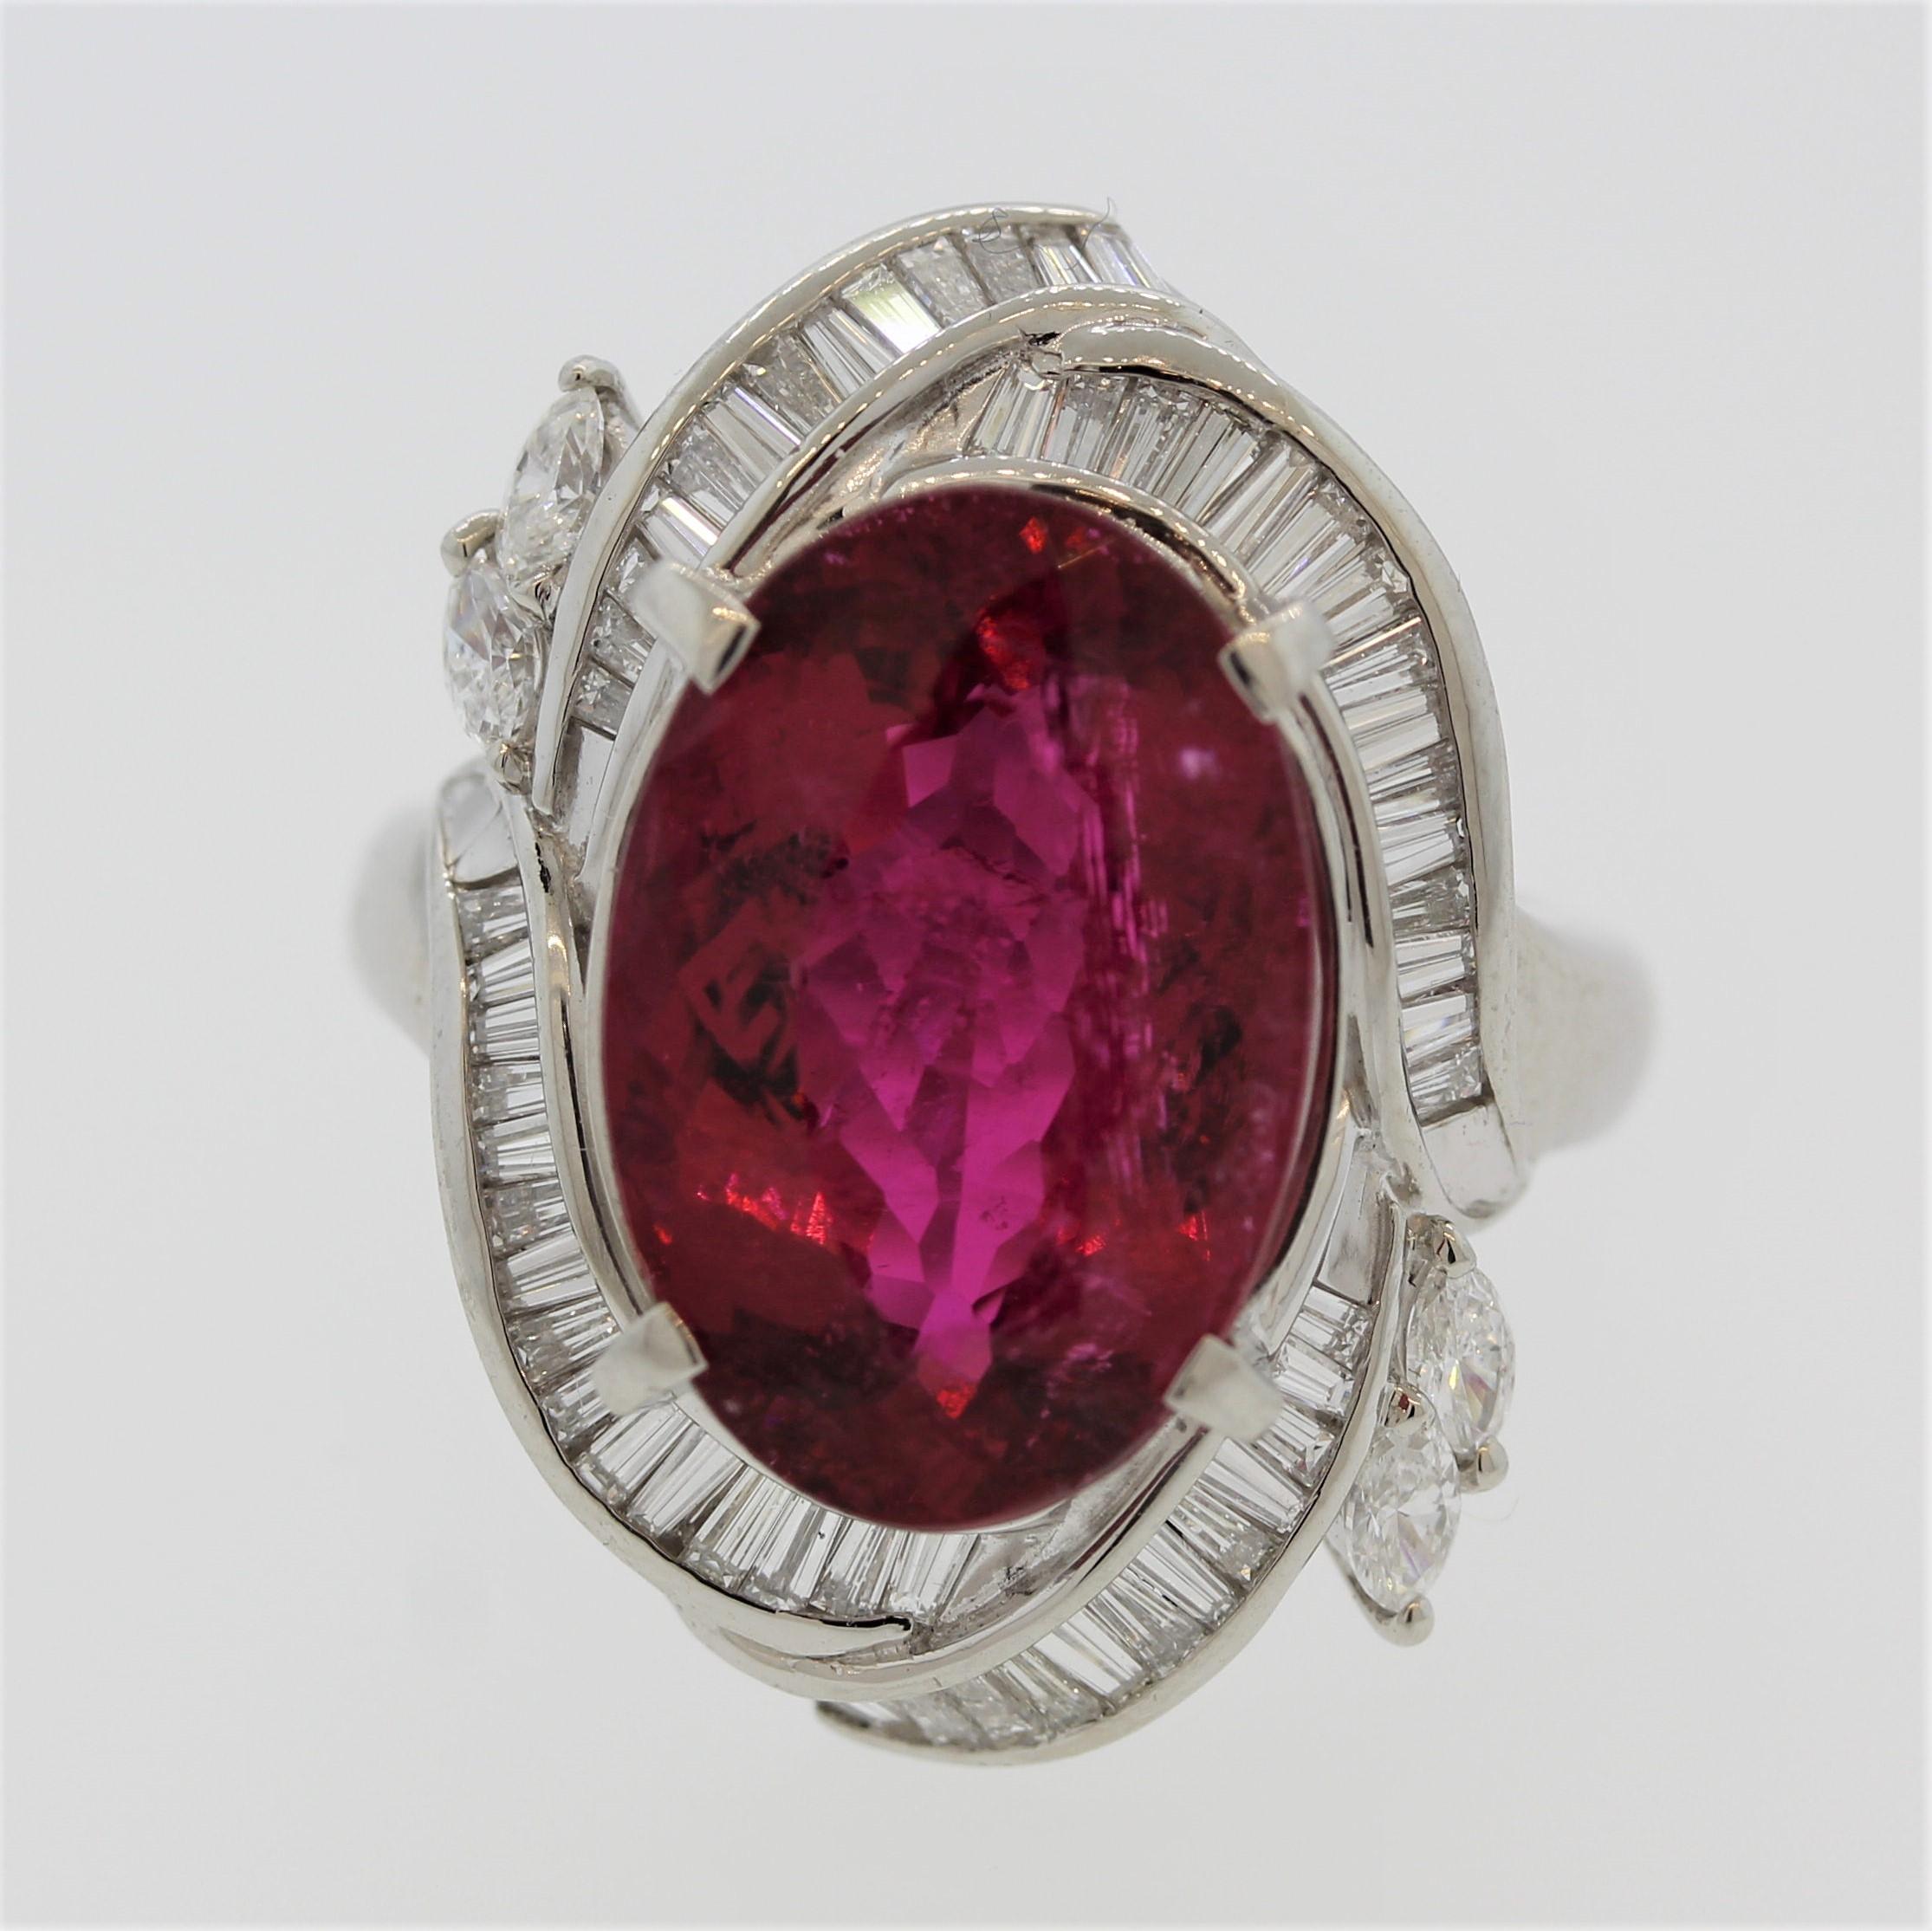 A superb example of the fine red variety of tourmaline called rubelite. This example shaped as an oval weighs 9.17 carats and has a vivid red color that rivals the finest rubies, giving the stone the name “ruby like” aka rubelite. It is accented by